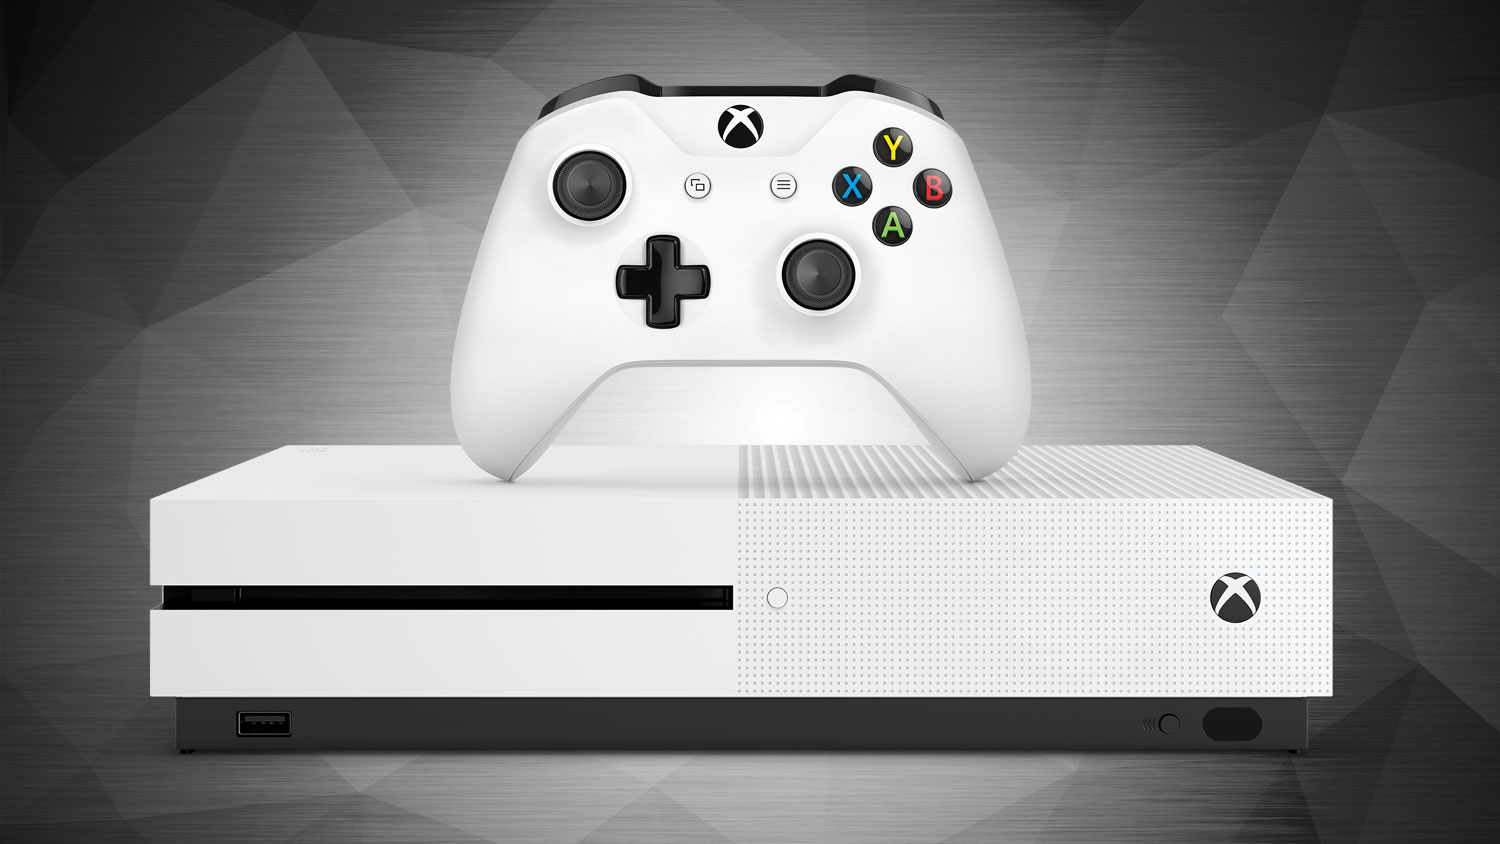 White Sunset Overdrive Xbox One bundle confirmed